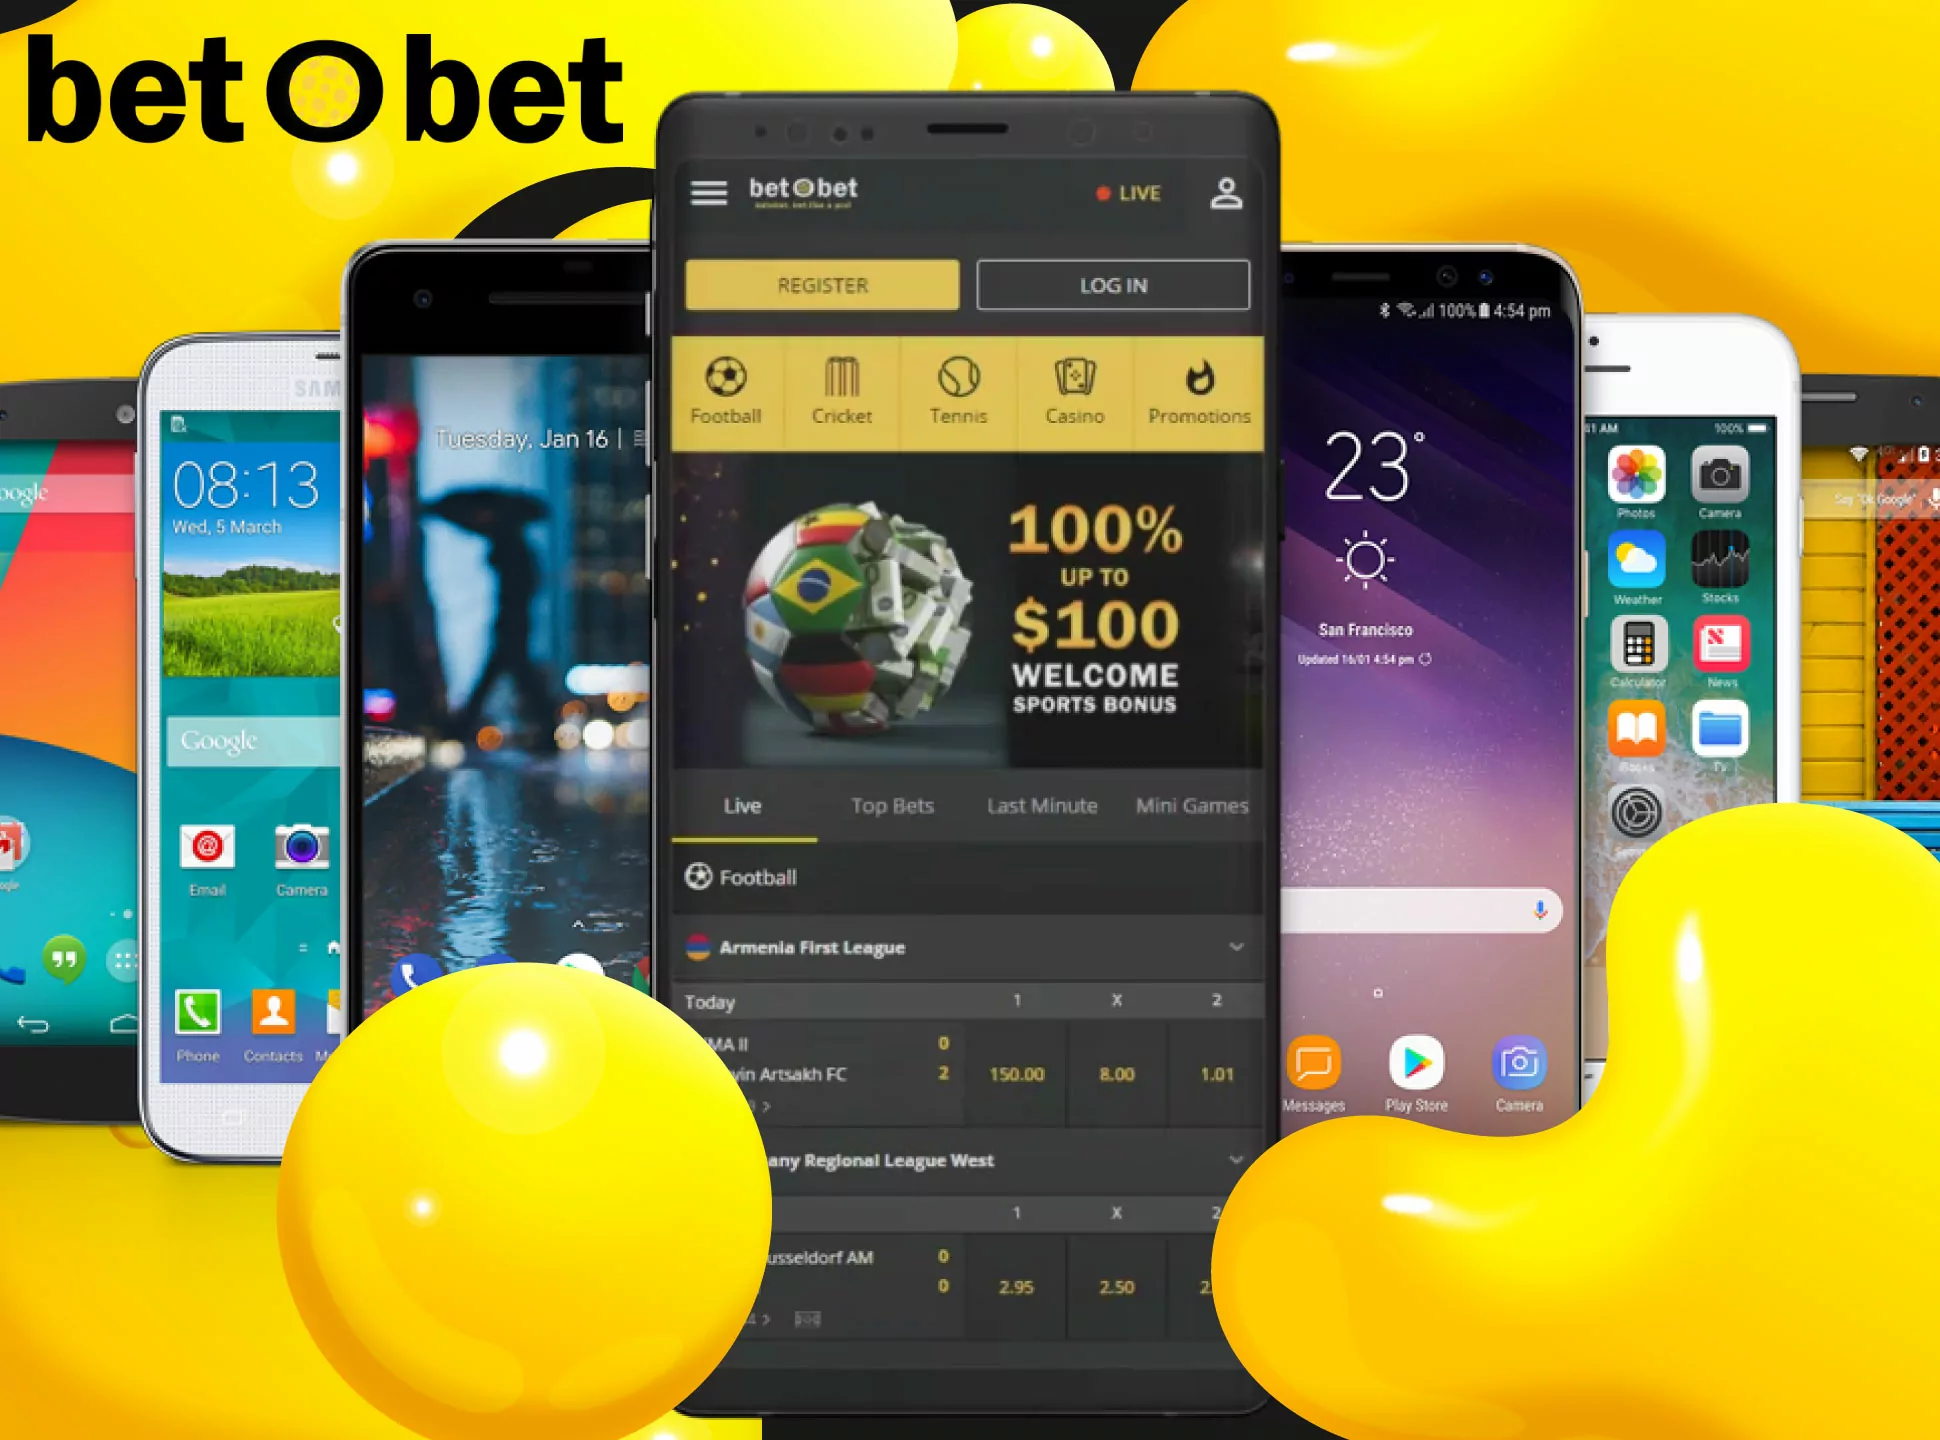 Almost all the modern devices can run the Betobet mobile app.